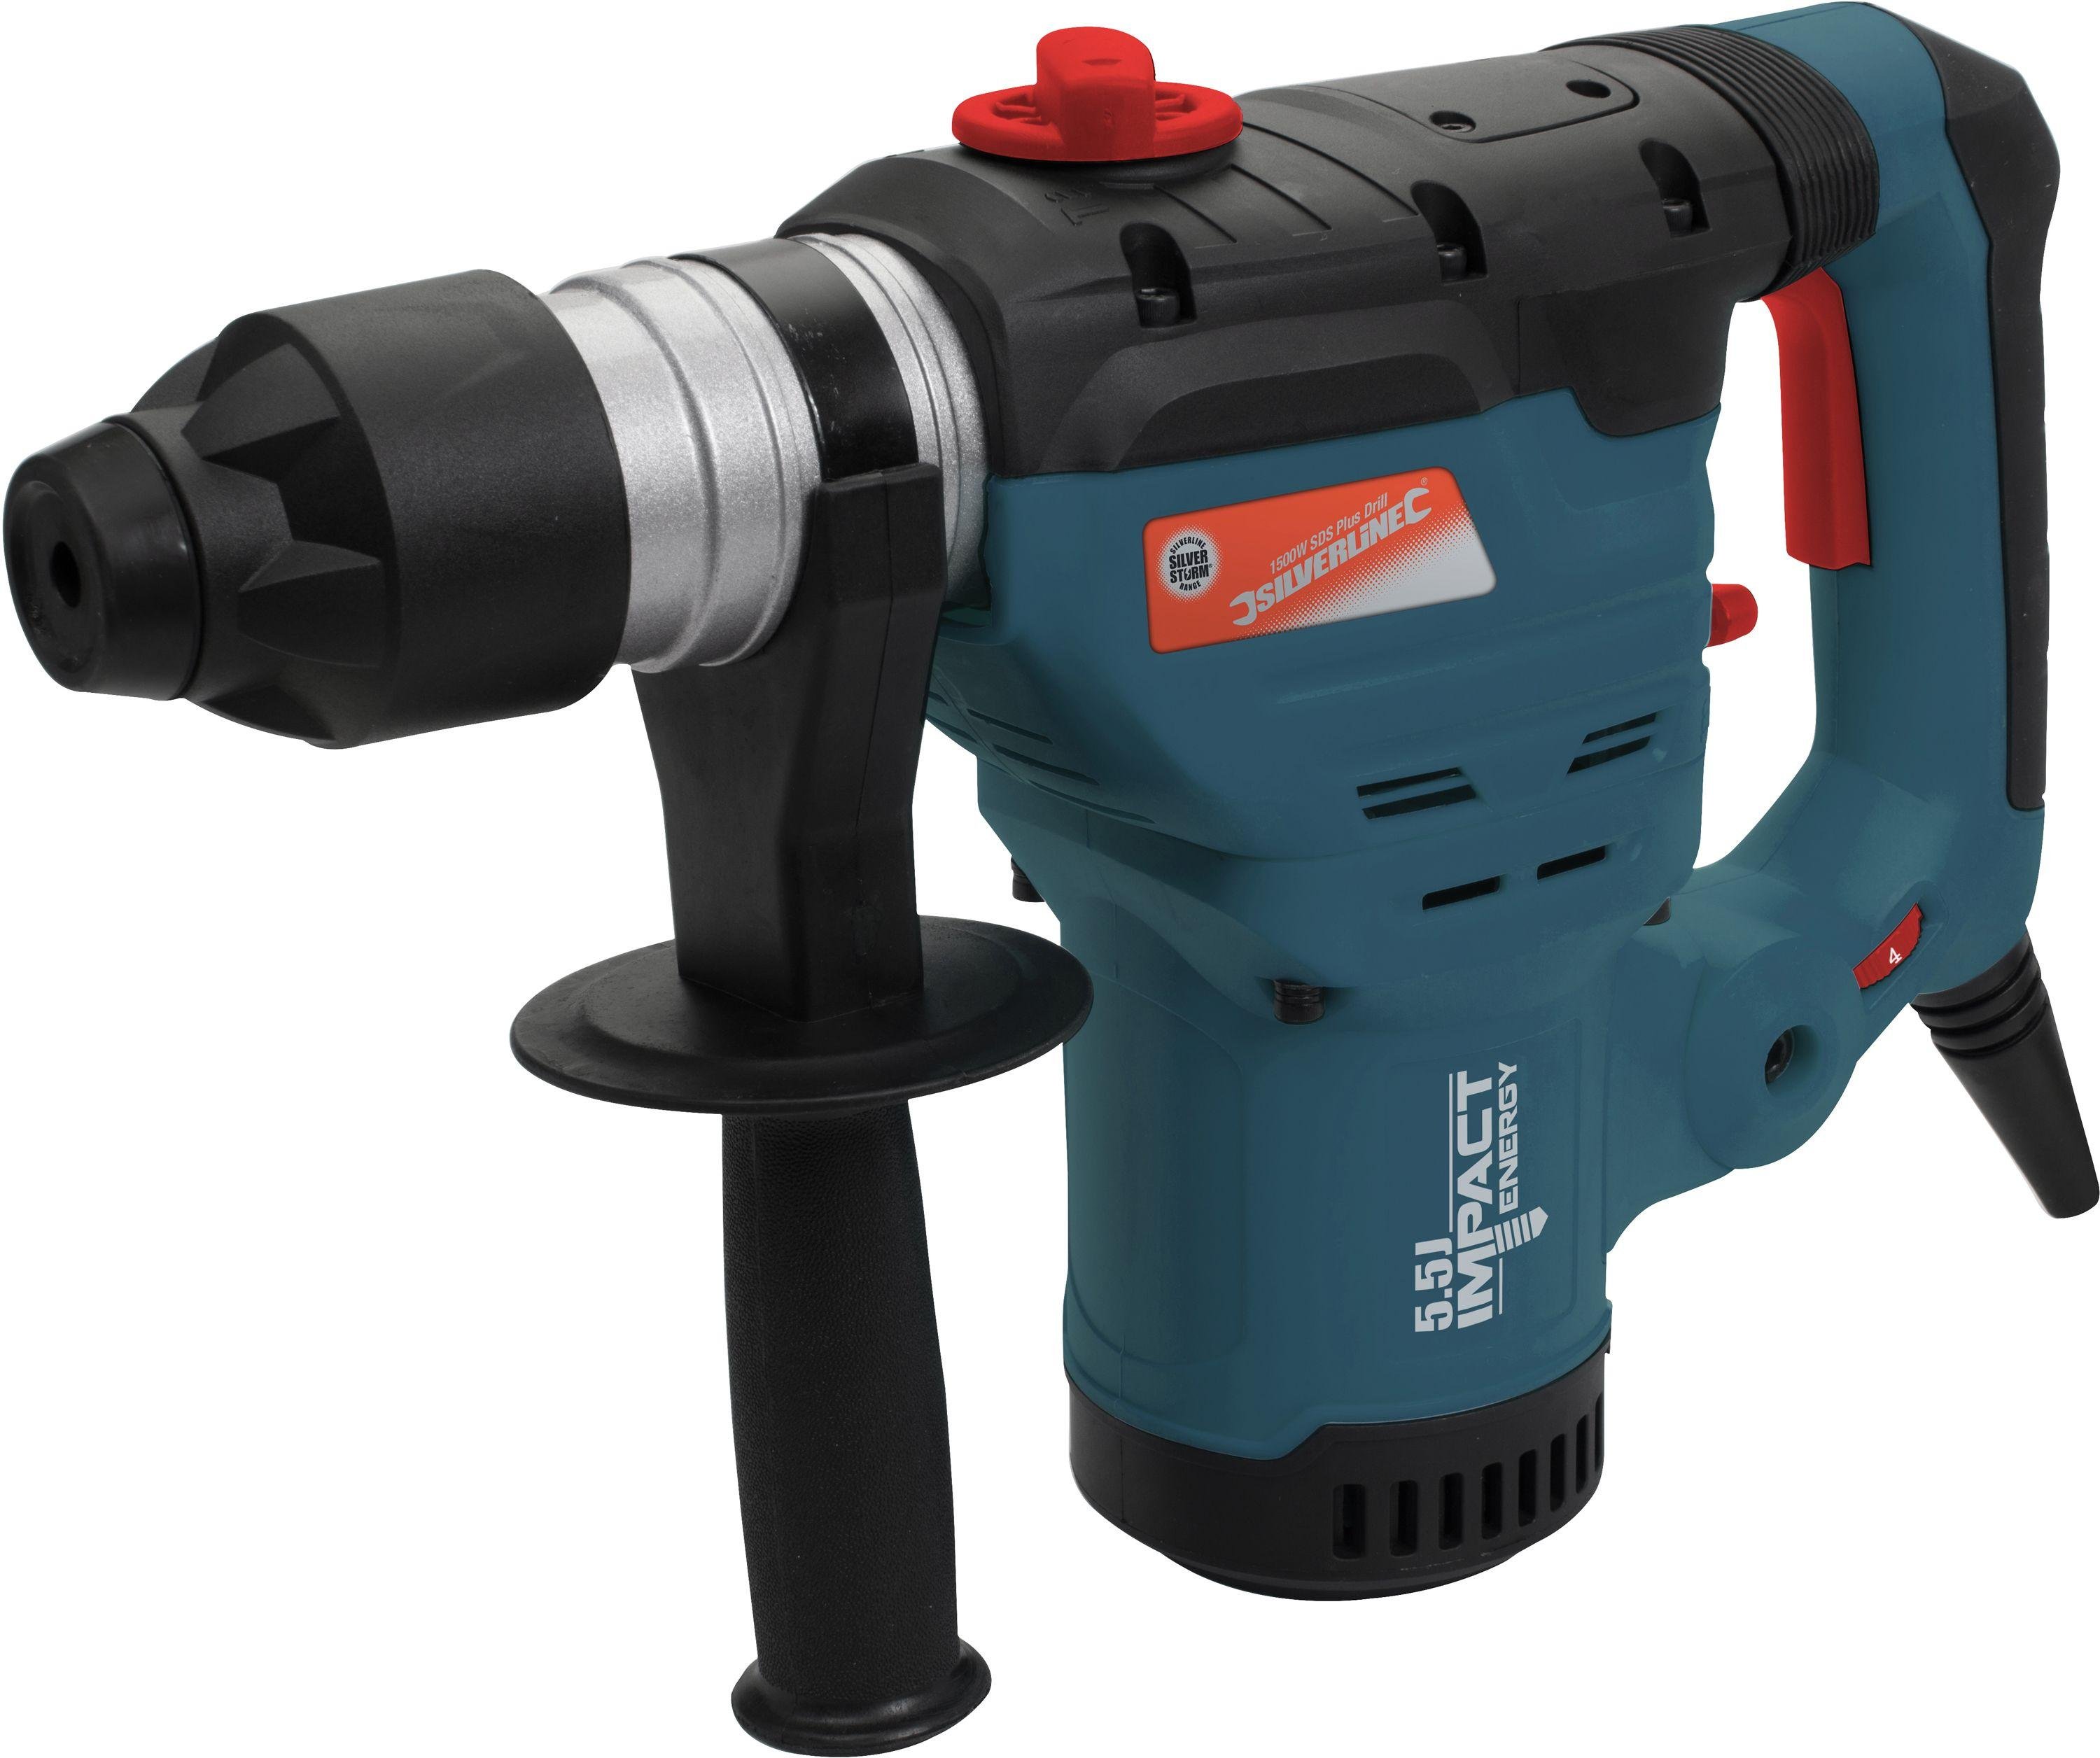 Silverstorm Corded SDS Plus Drill - 1500W